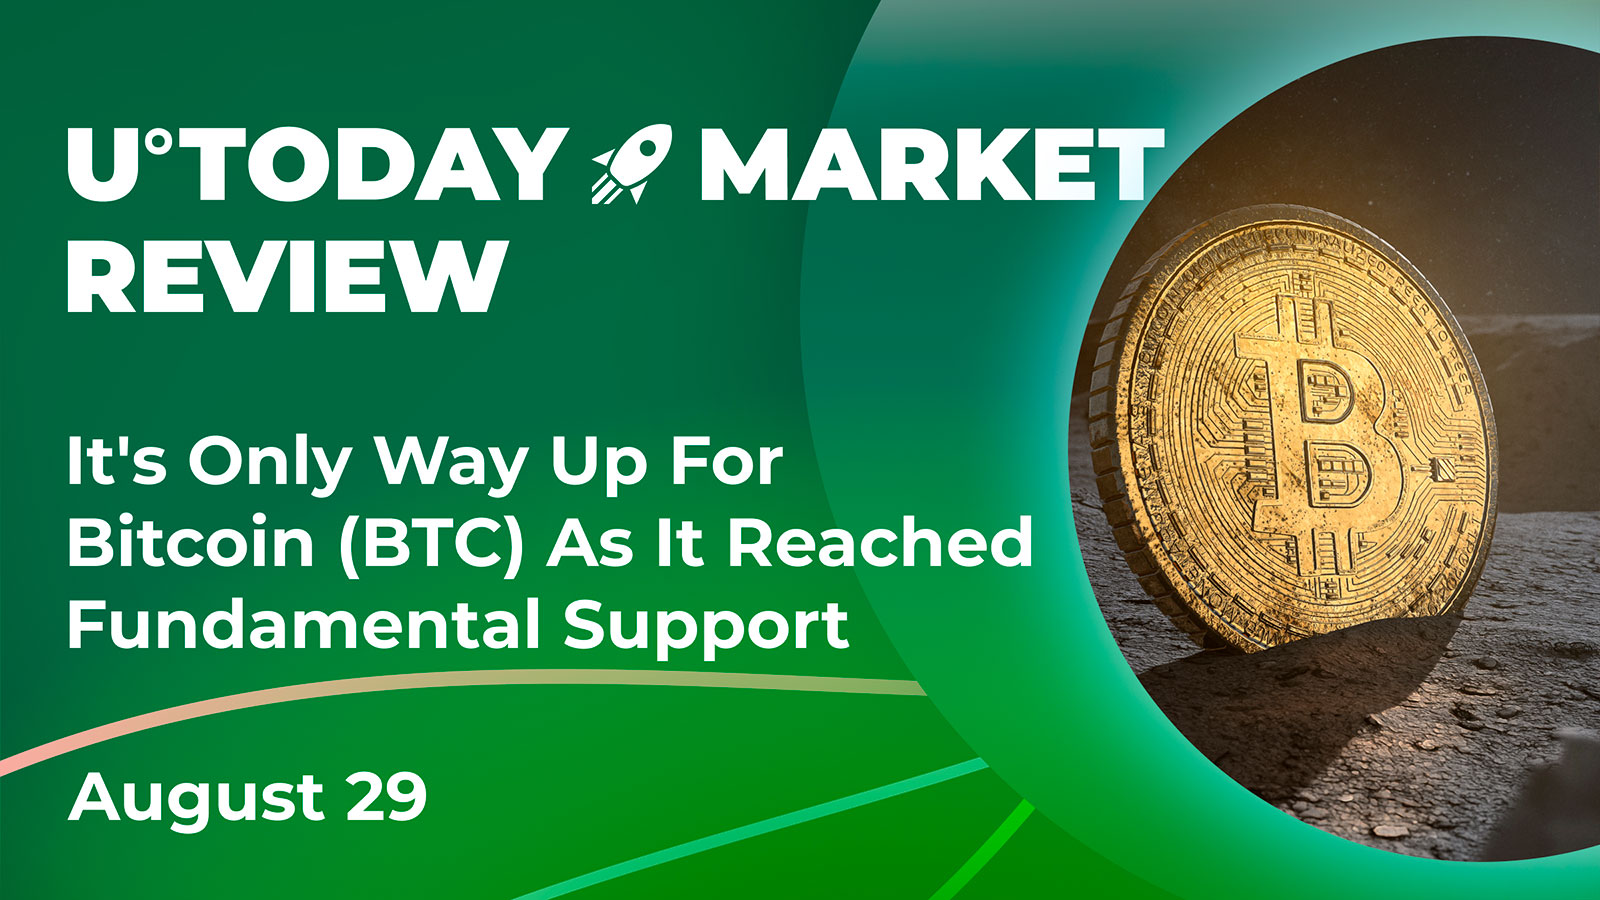 It's Only Way Up For Bitcoin (BTC) As It reached Fundamental Support: Crypto Market Review, August 29